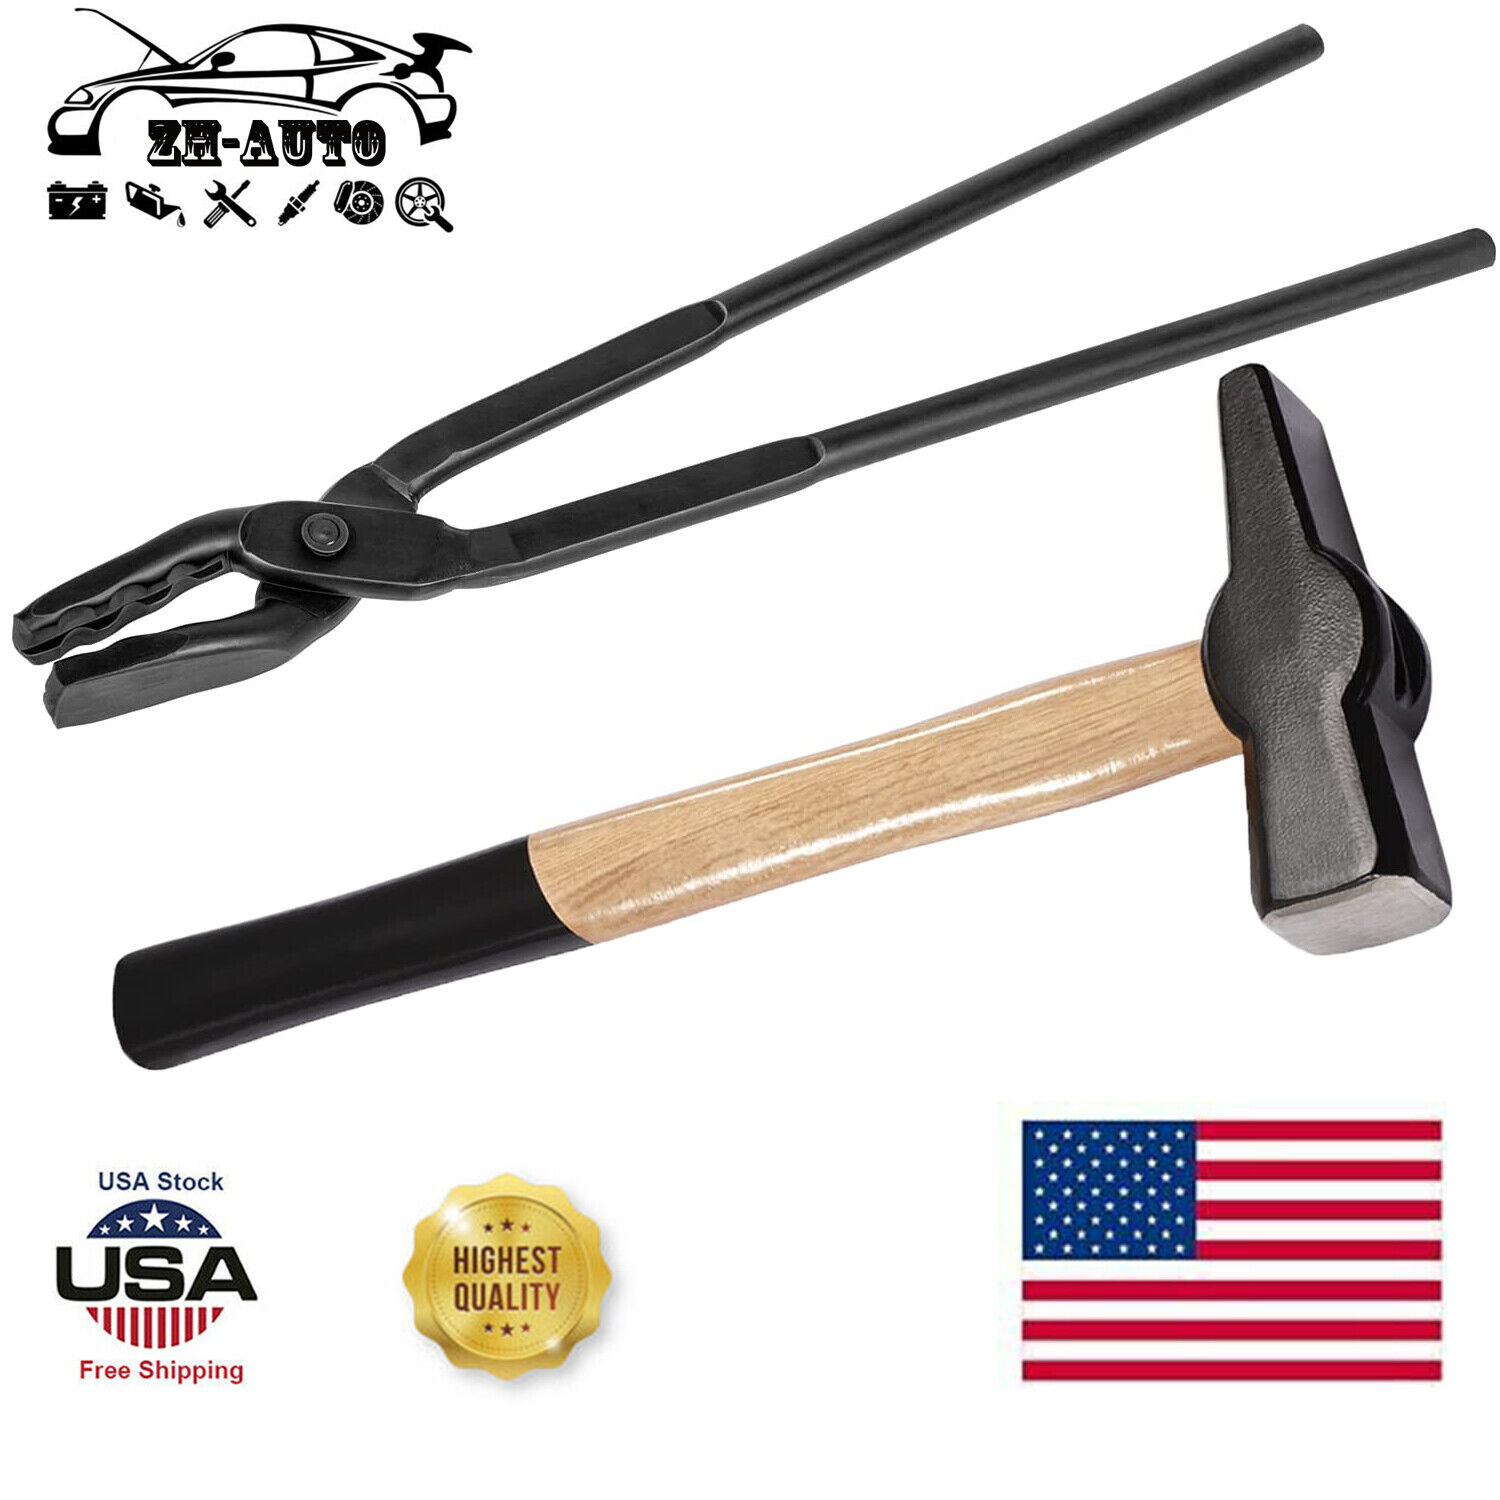 Blacksmith 17” Wolf Jaw Tongs and Hammer Tool Set Essential Tools for Blacksmith